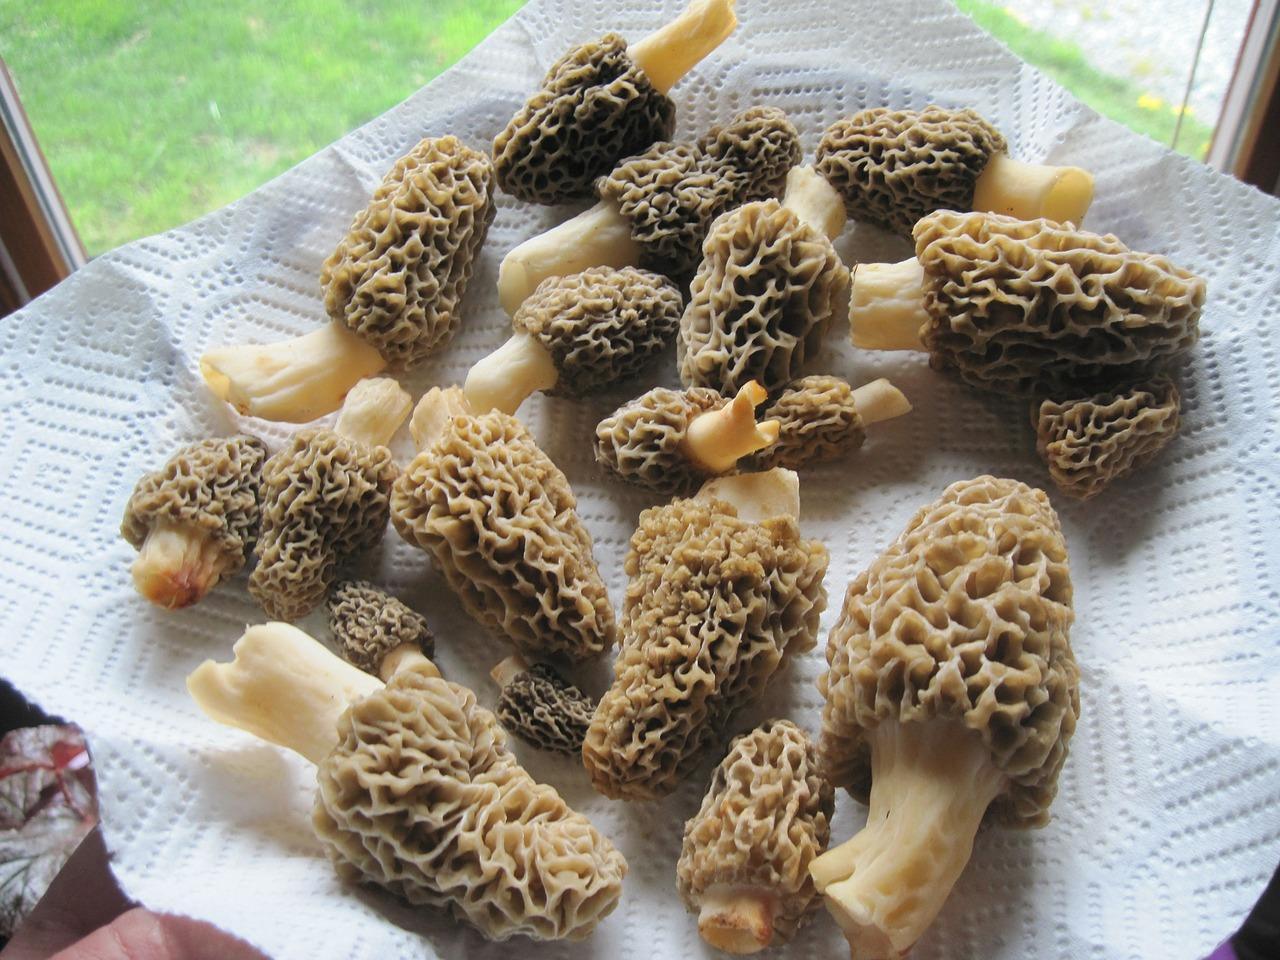 How to cook mushrooms stitches and morels